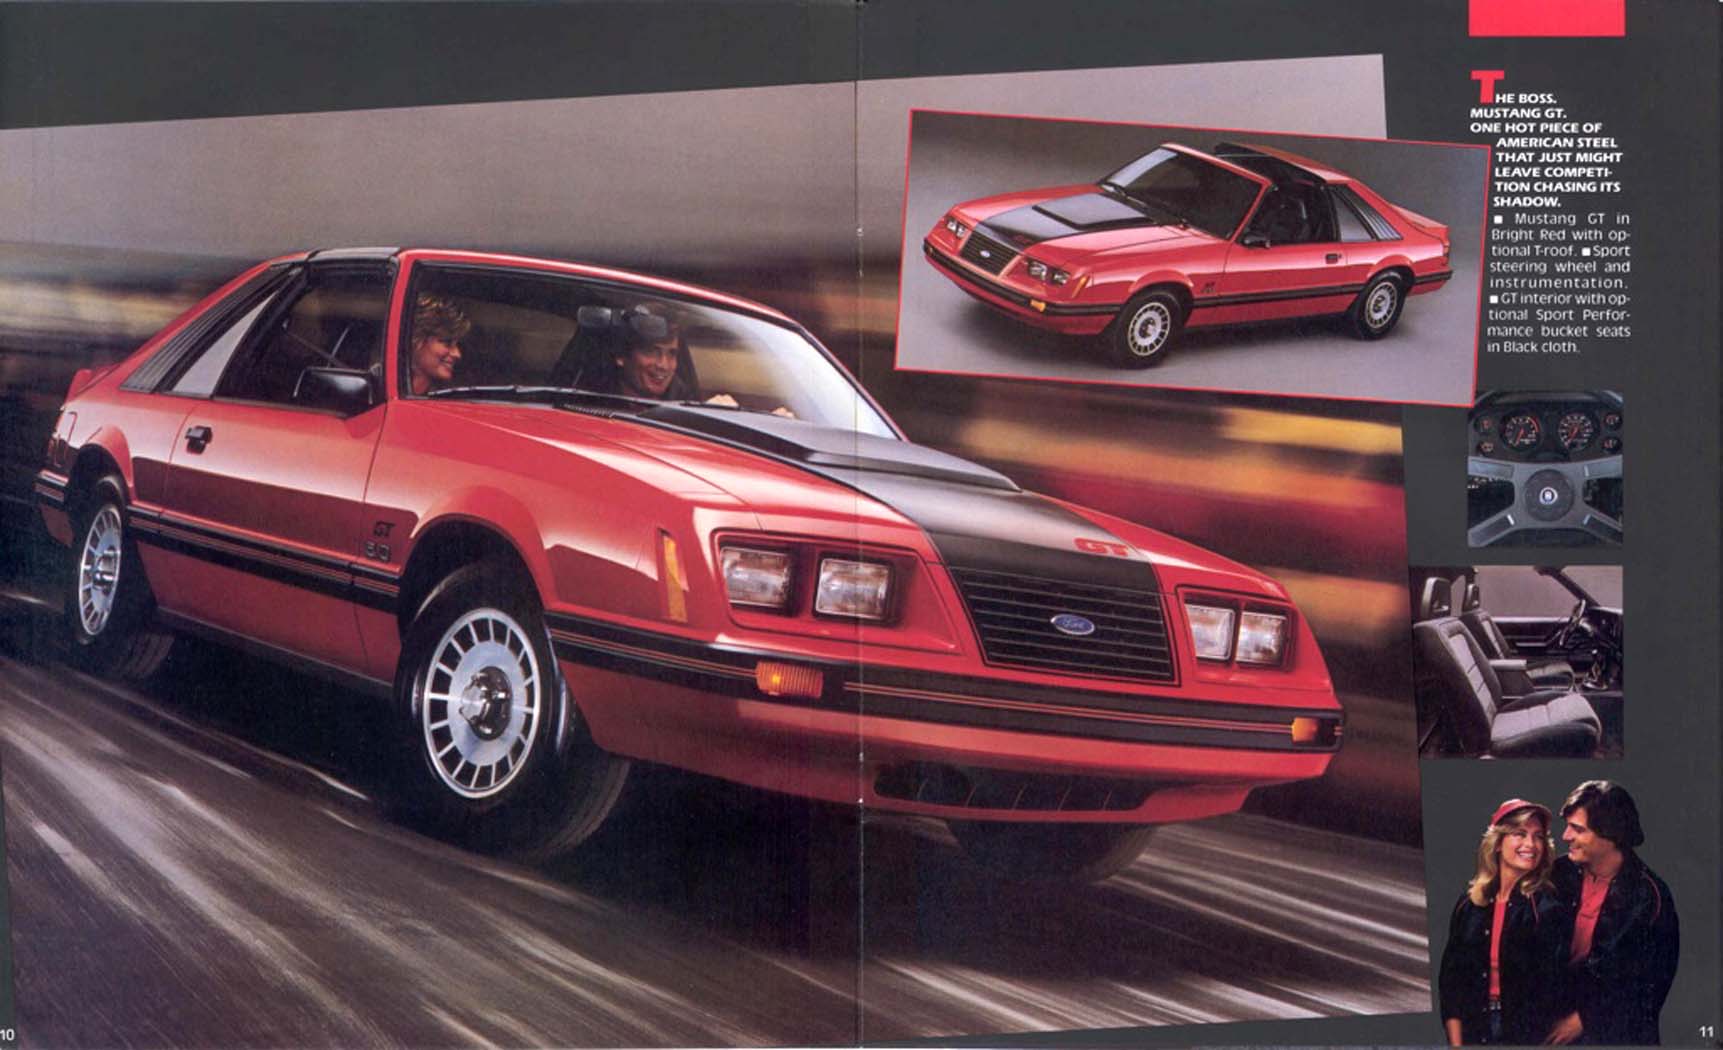 1983_Ford_Mustang-10-11